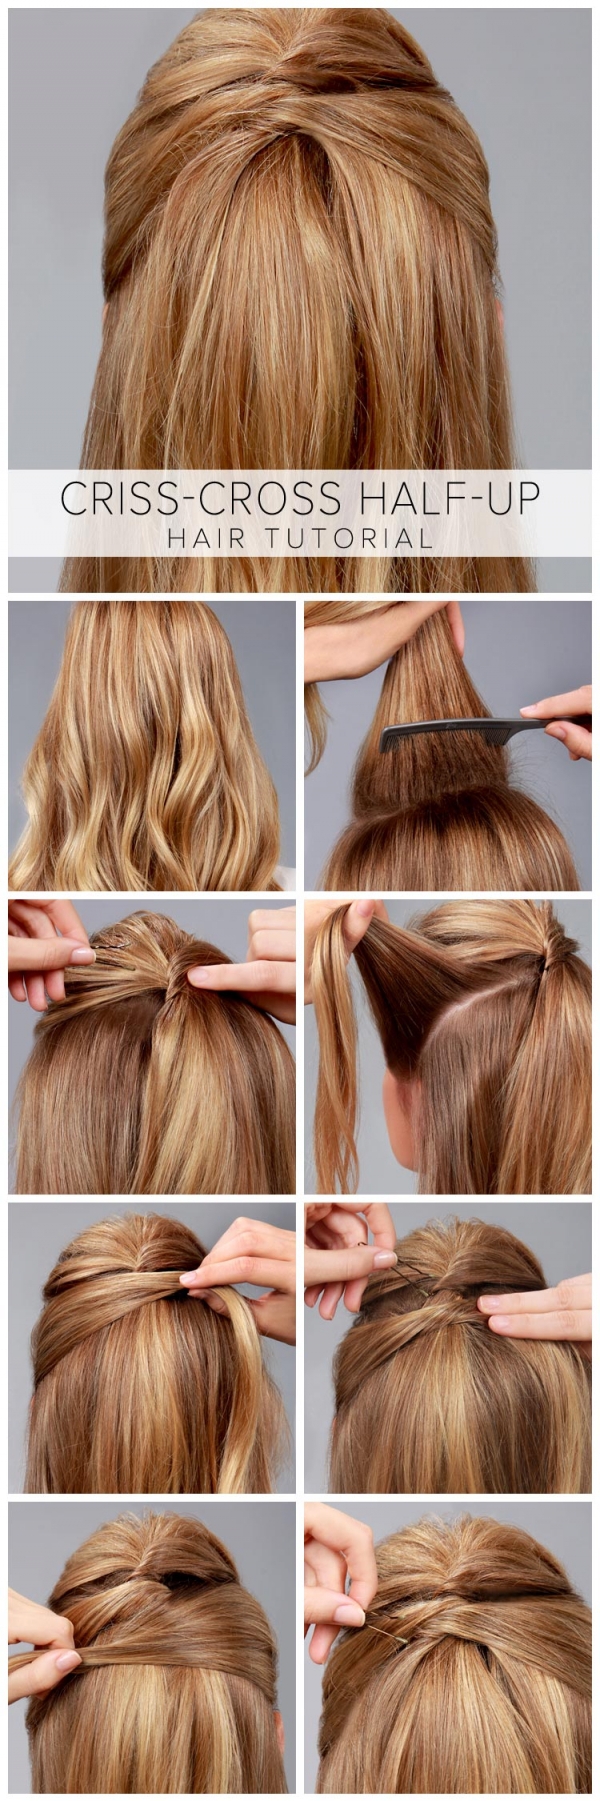 Hairstyles for Long, Straight Hair | At Length by Prose Hair